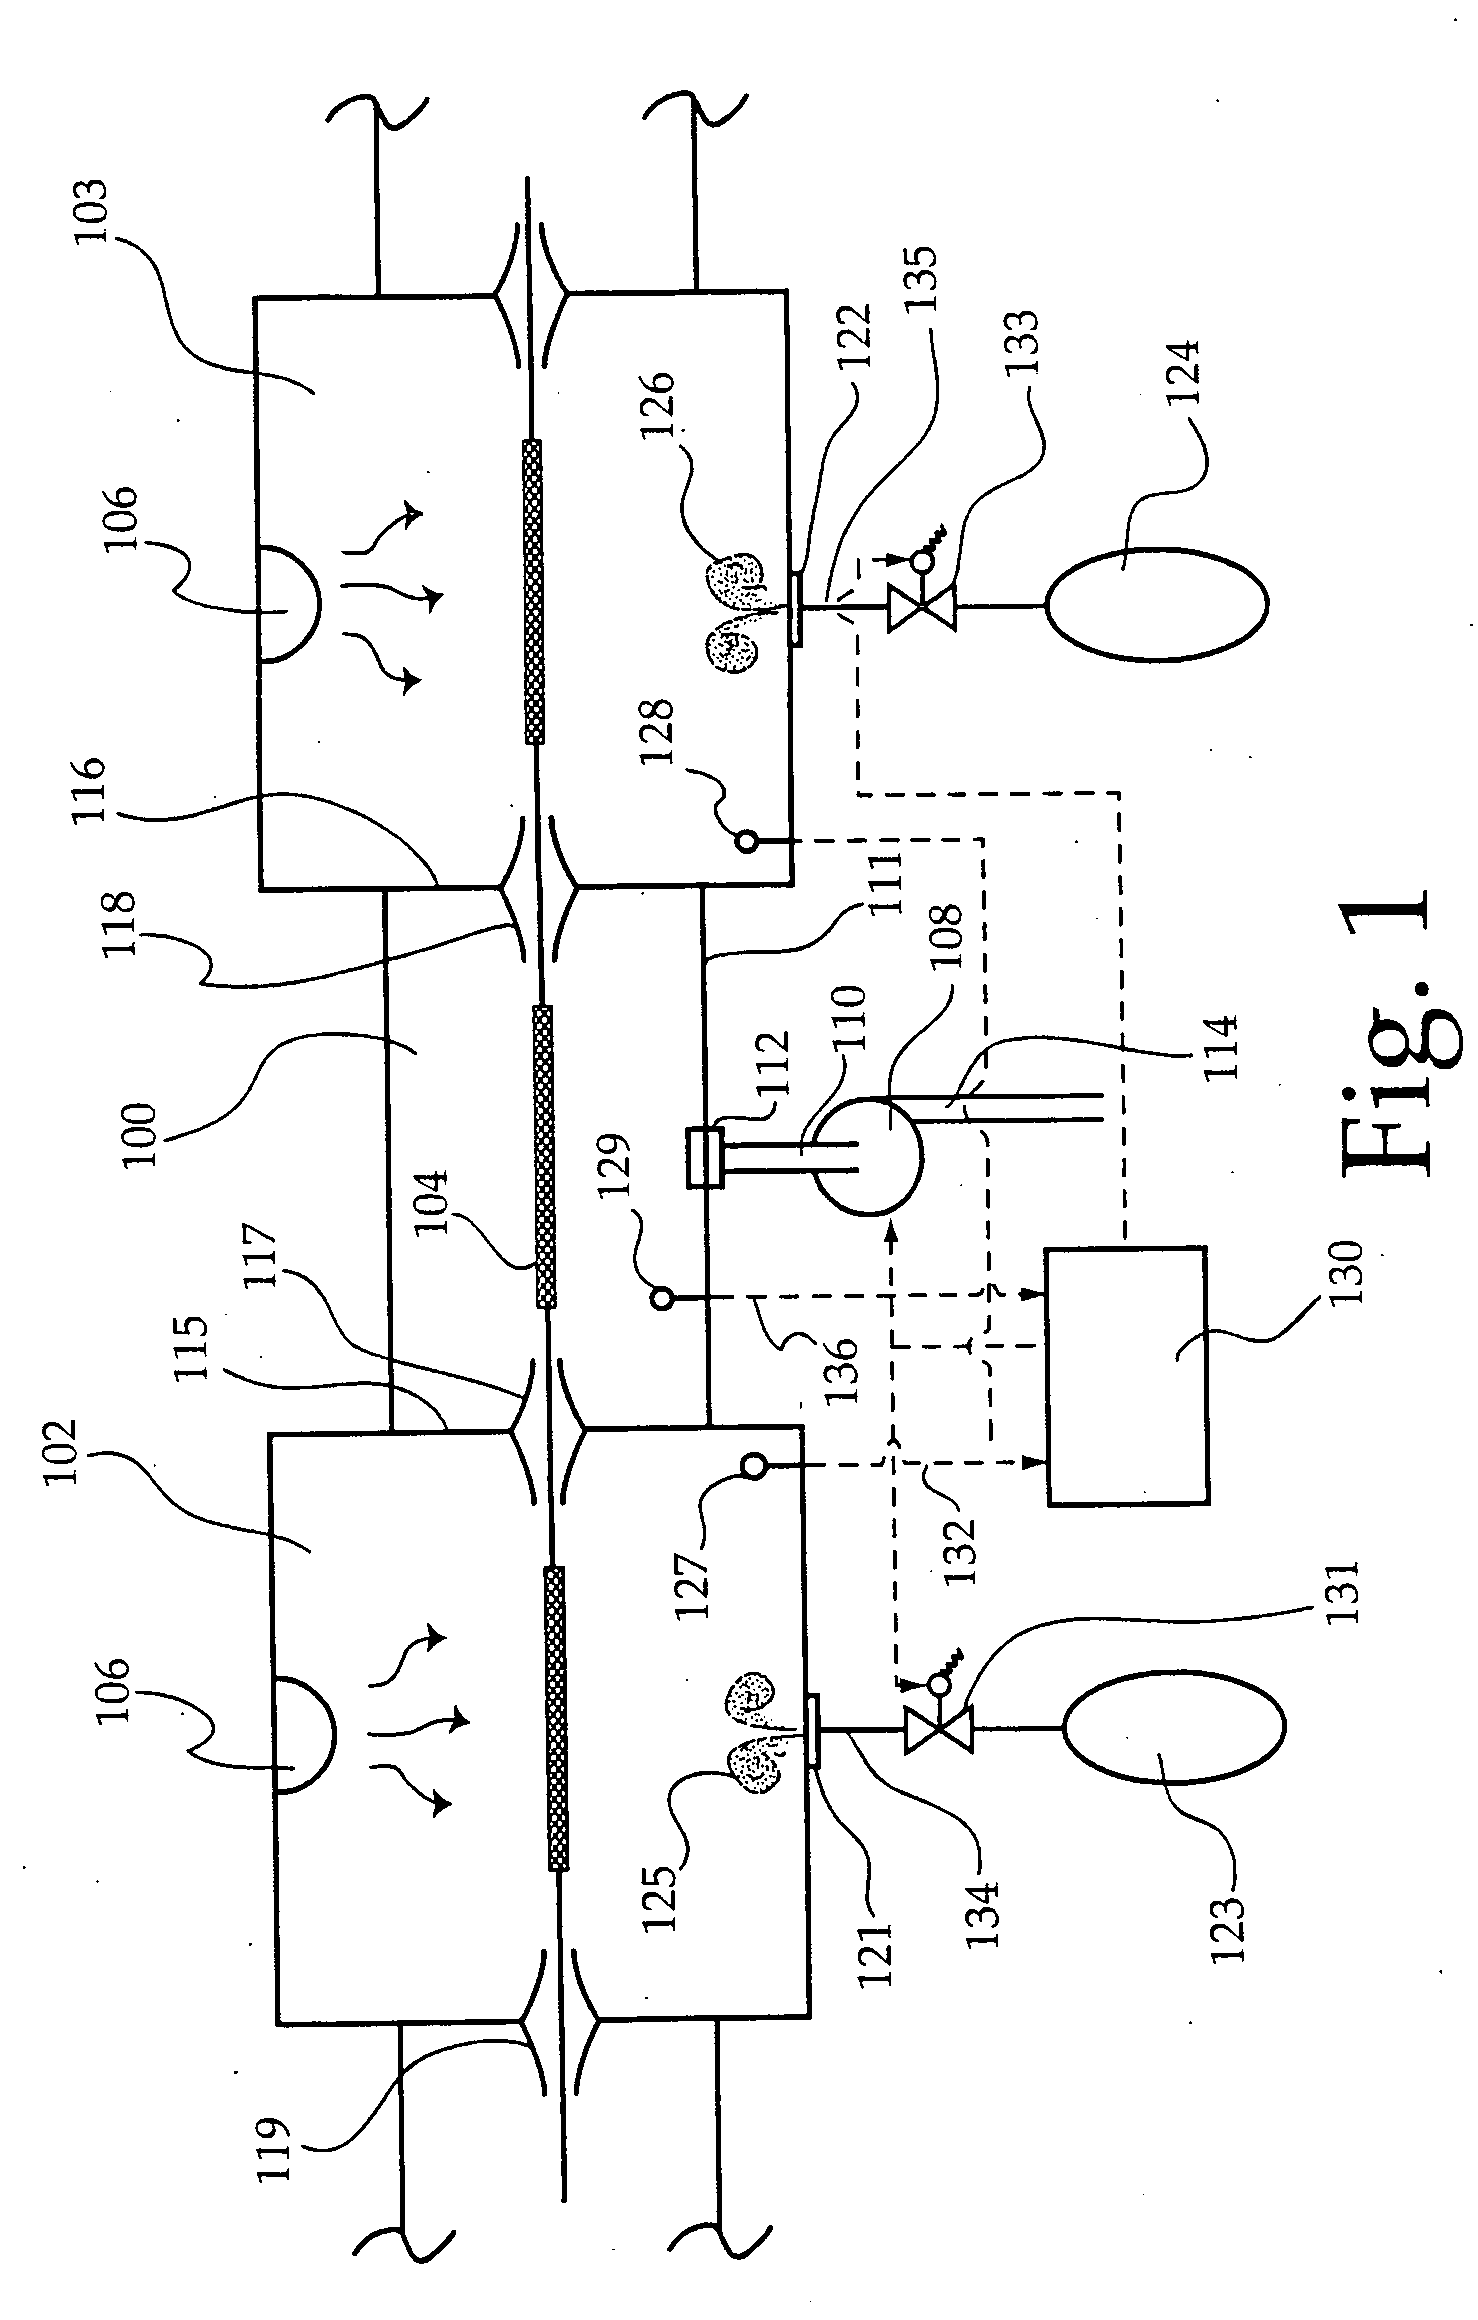 Pressure control system in a photovoltaic substrate deposition apparatus